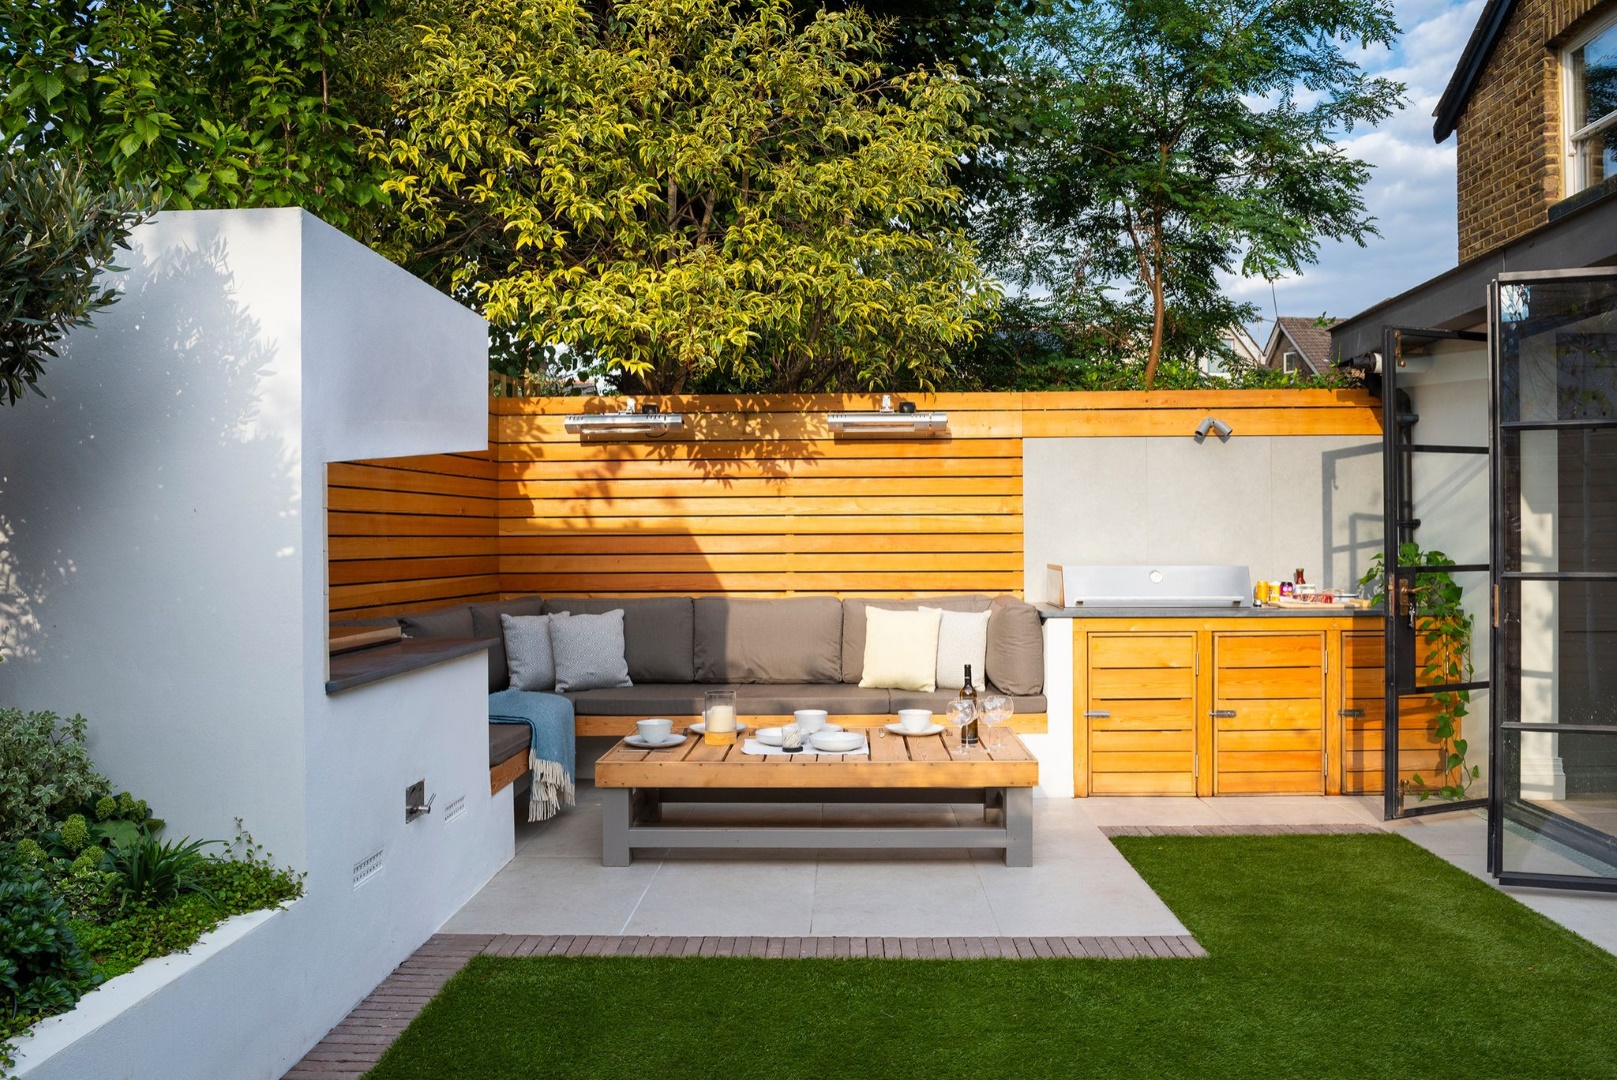 20 Contemporary Patio Designs That Redefine Outdoor Comfort and Elegance